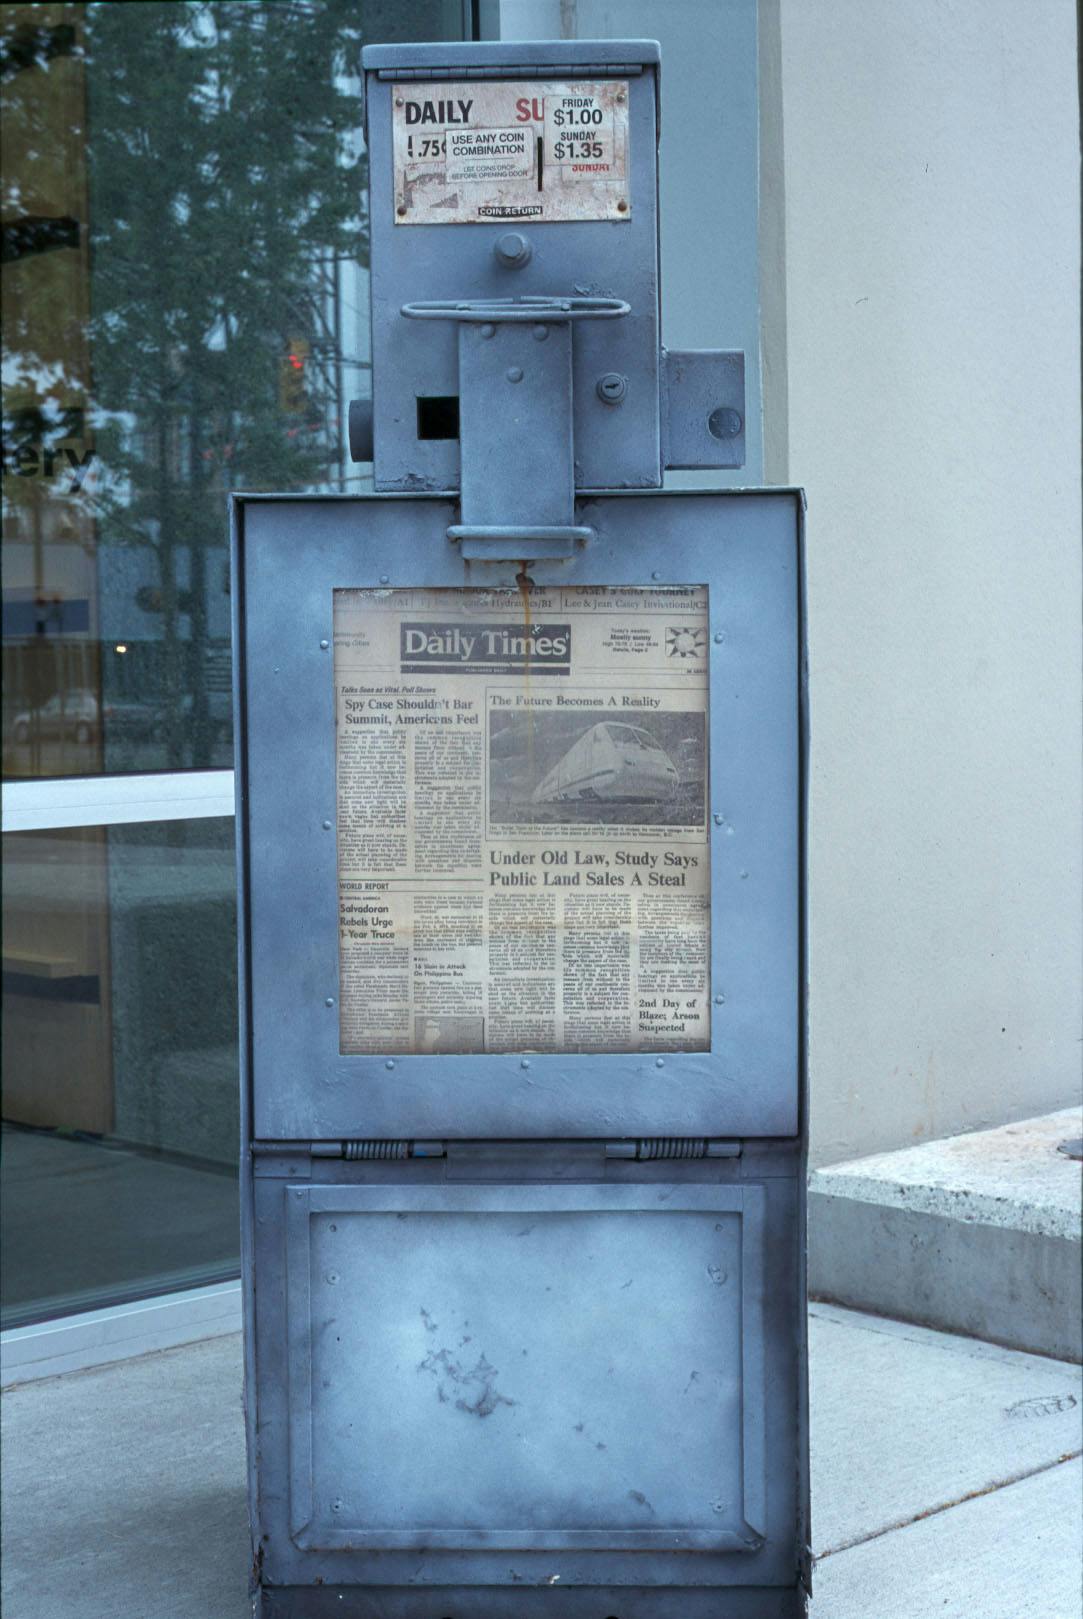 A metal made newspaper dispenser sits outside of the CAG’s front entrance. This silver coloured machine looks worn and contains a yellowed paper called Daily Times.